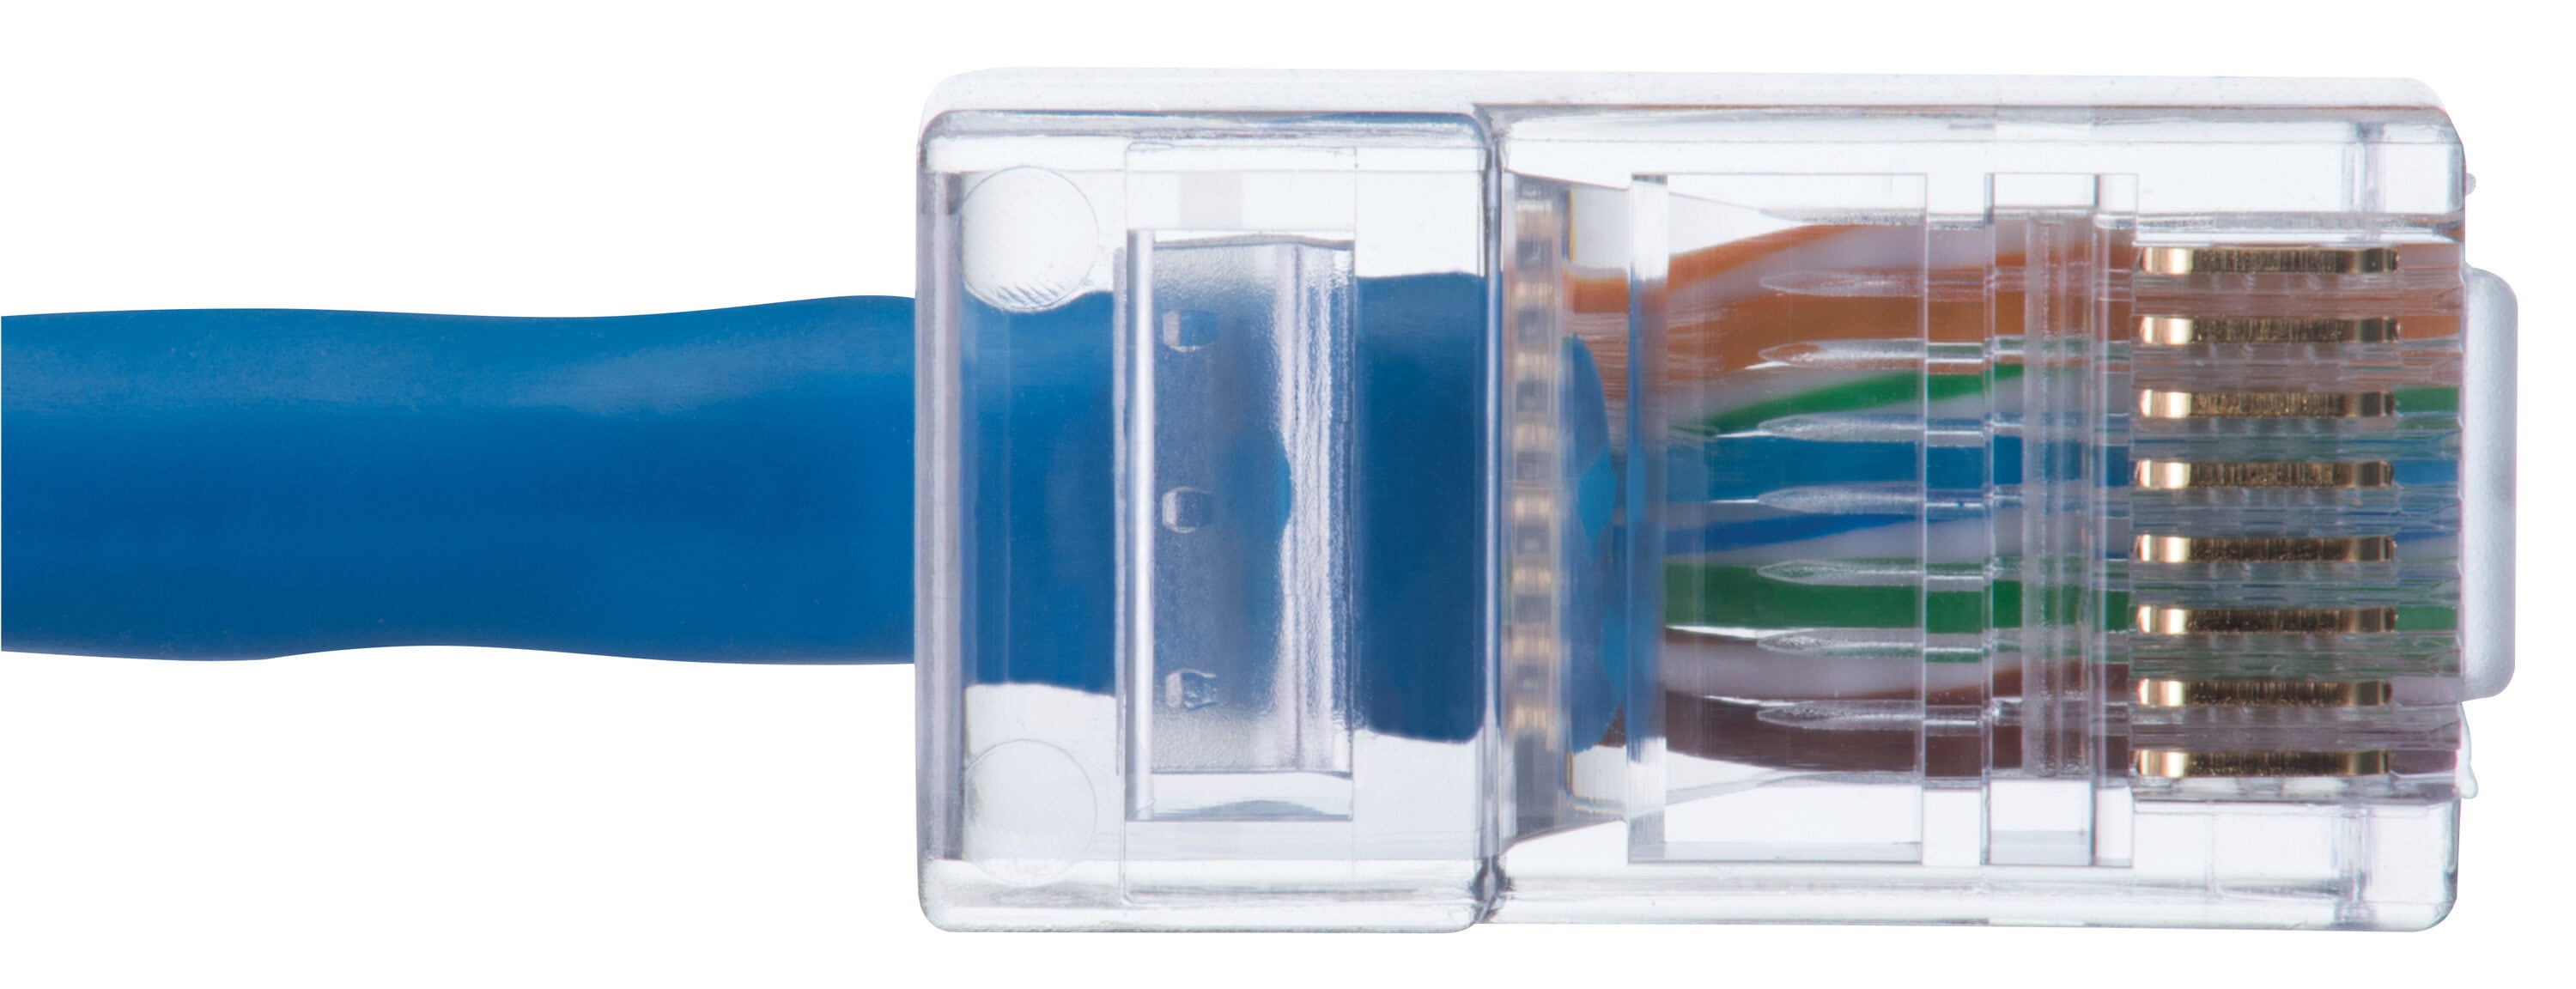 IDEAL 25-Pack Cat5e Rj45 Modular Plug in the Voice & Data Connectors  department at